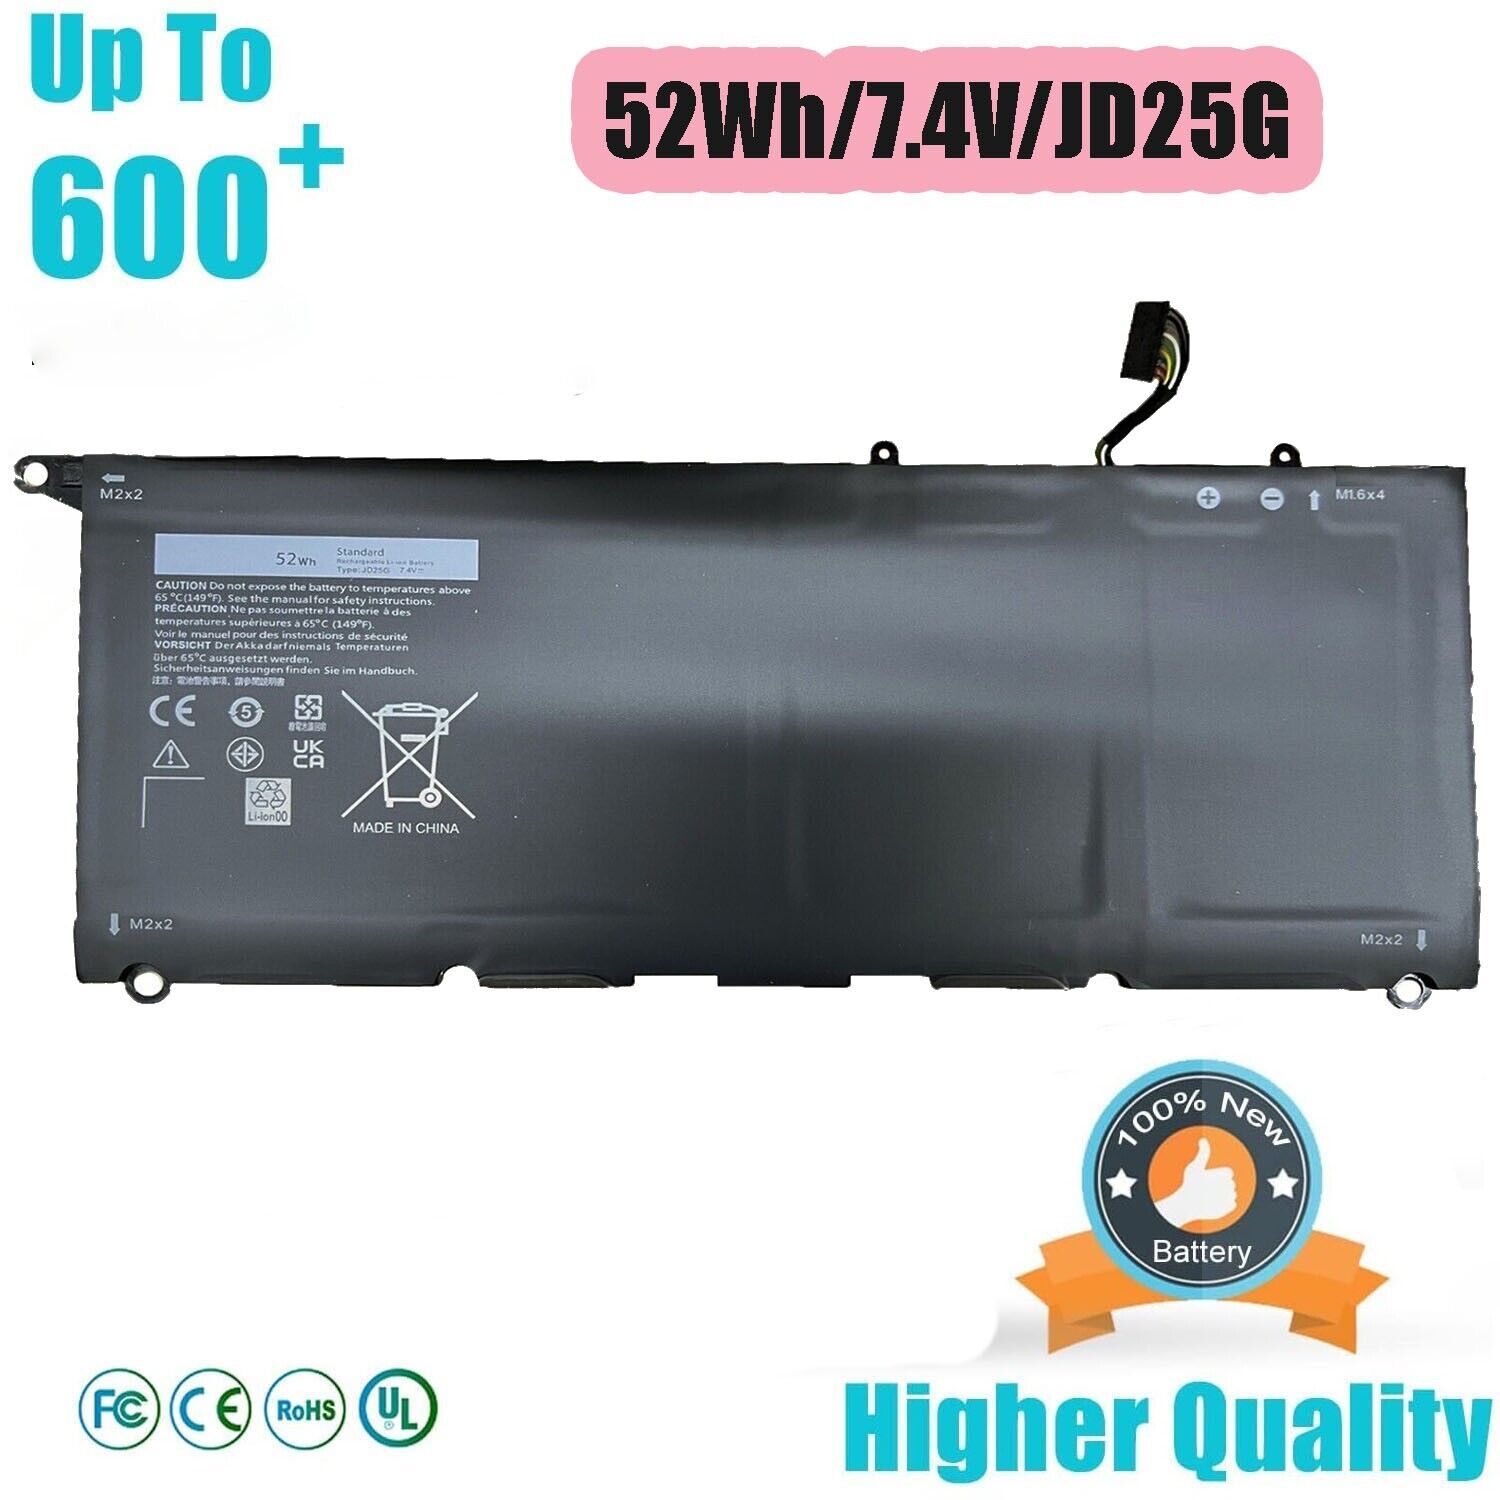 For Dell XPS 13 9350 9343 JD25G 90V7W Battery for Dell XPS13 XPS 13 9343 9350